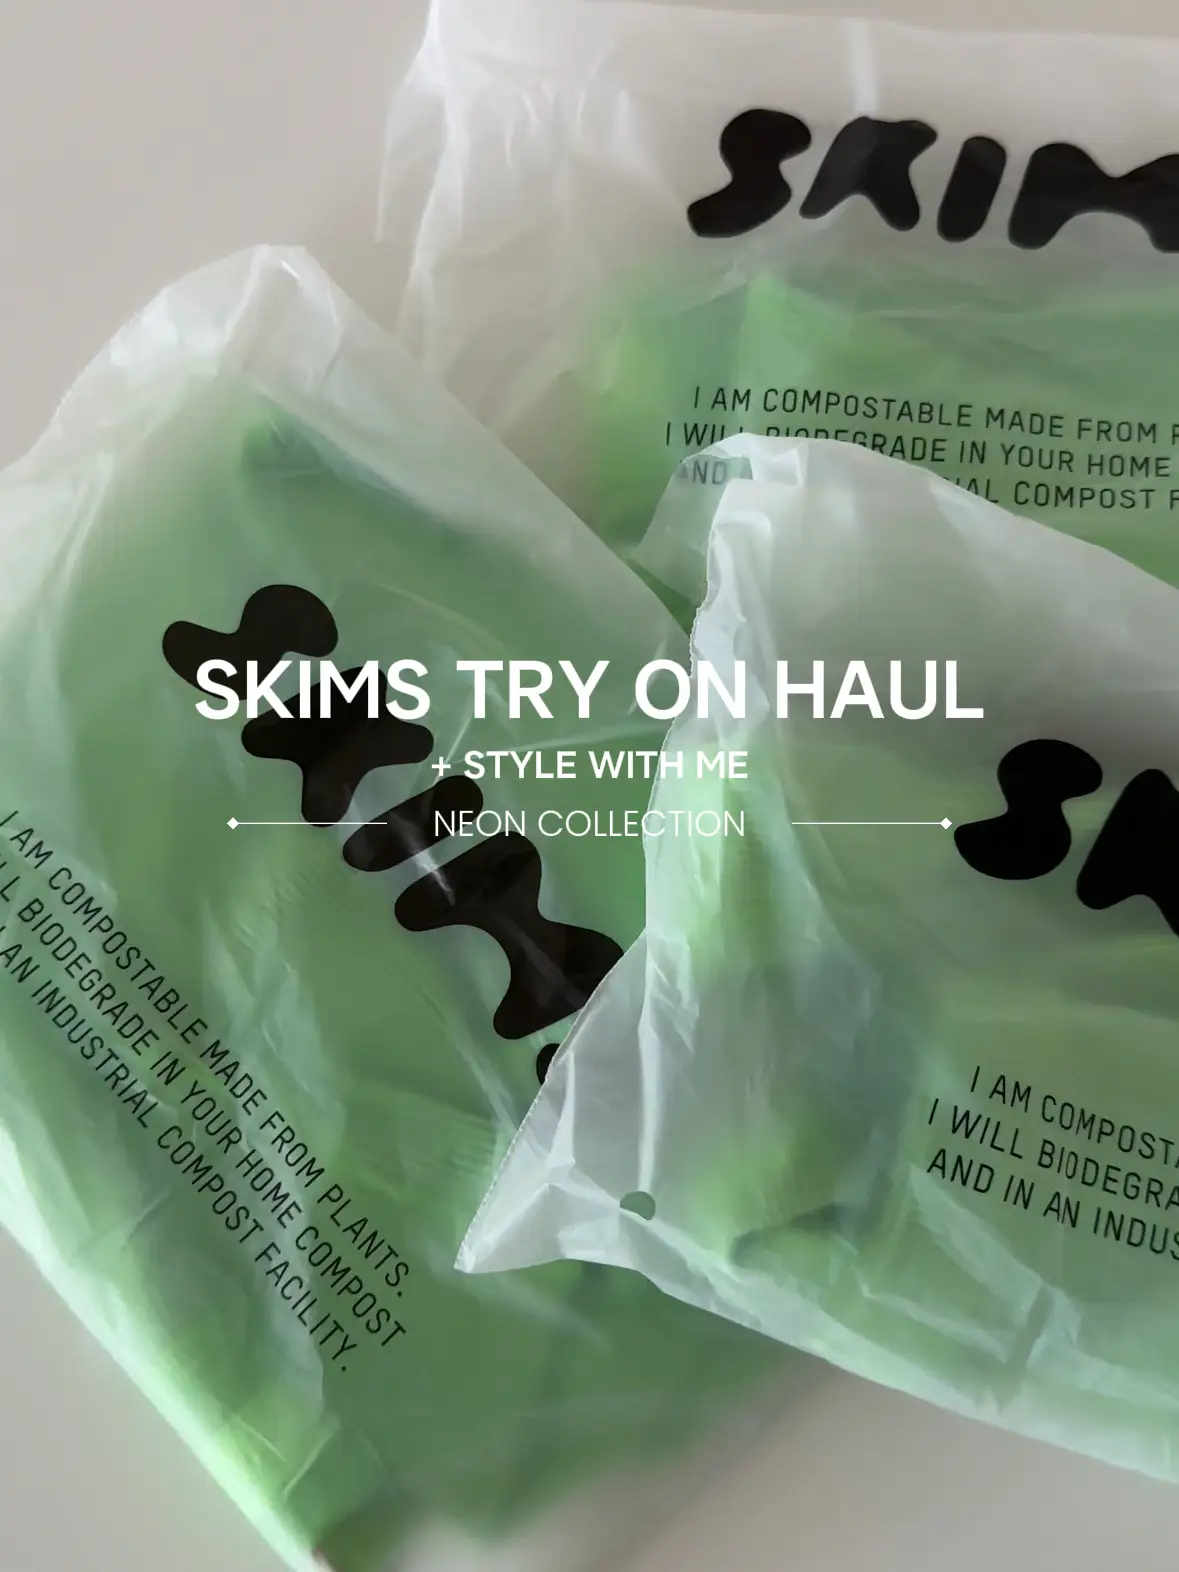 SKIMS TRY ON HAUL + STYLING  must have basics! 